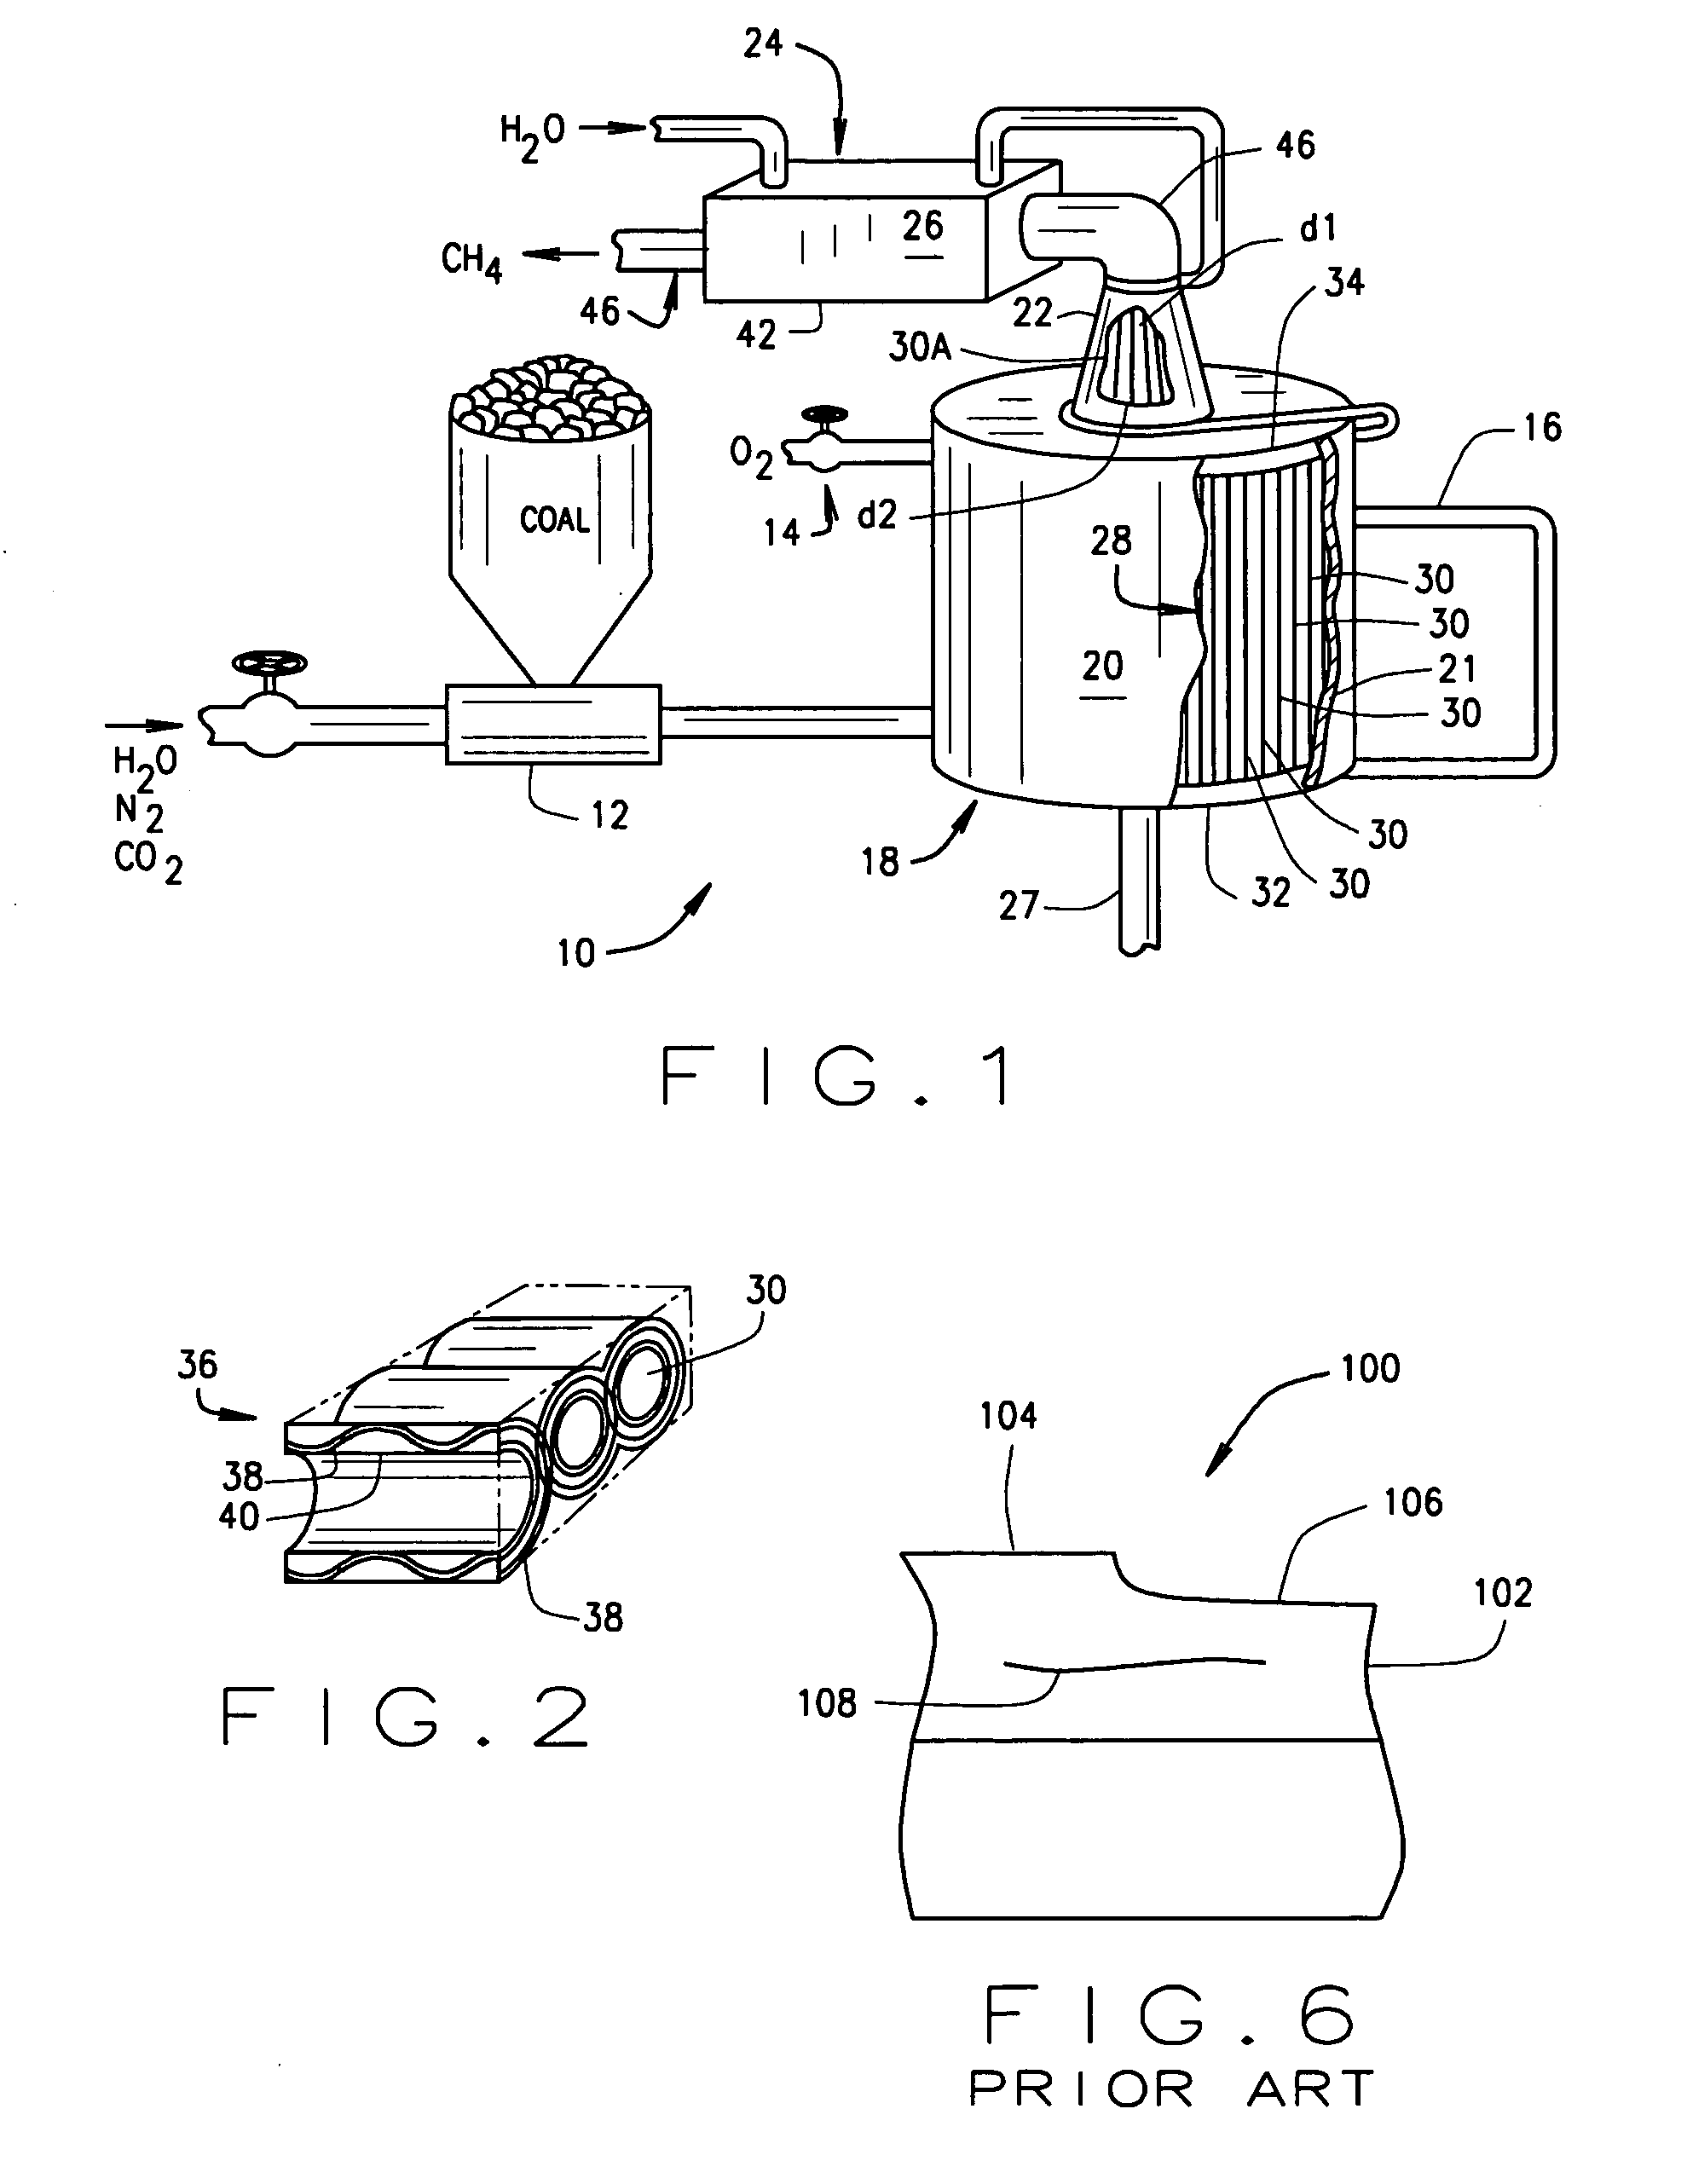 Regeneratively cooled synthesis gas generator